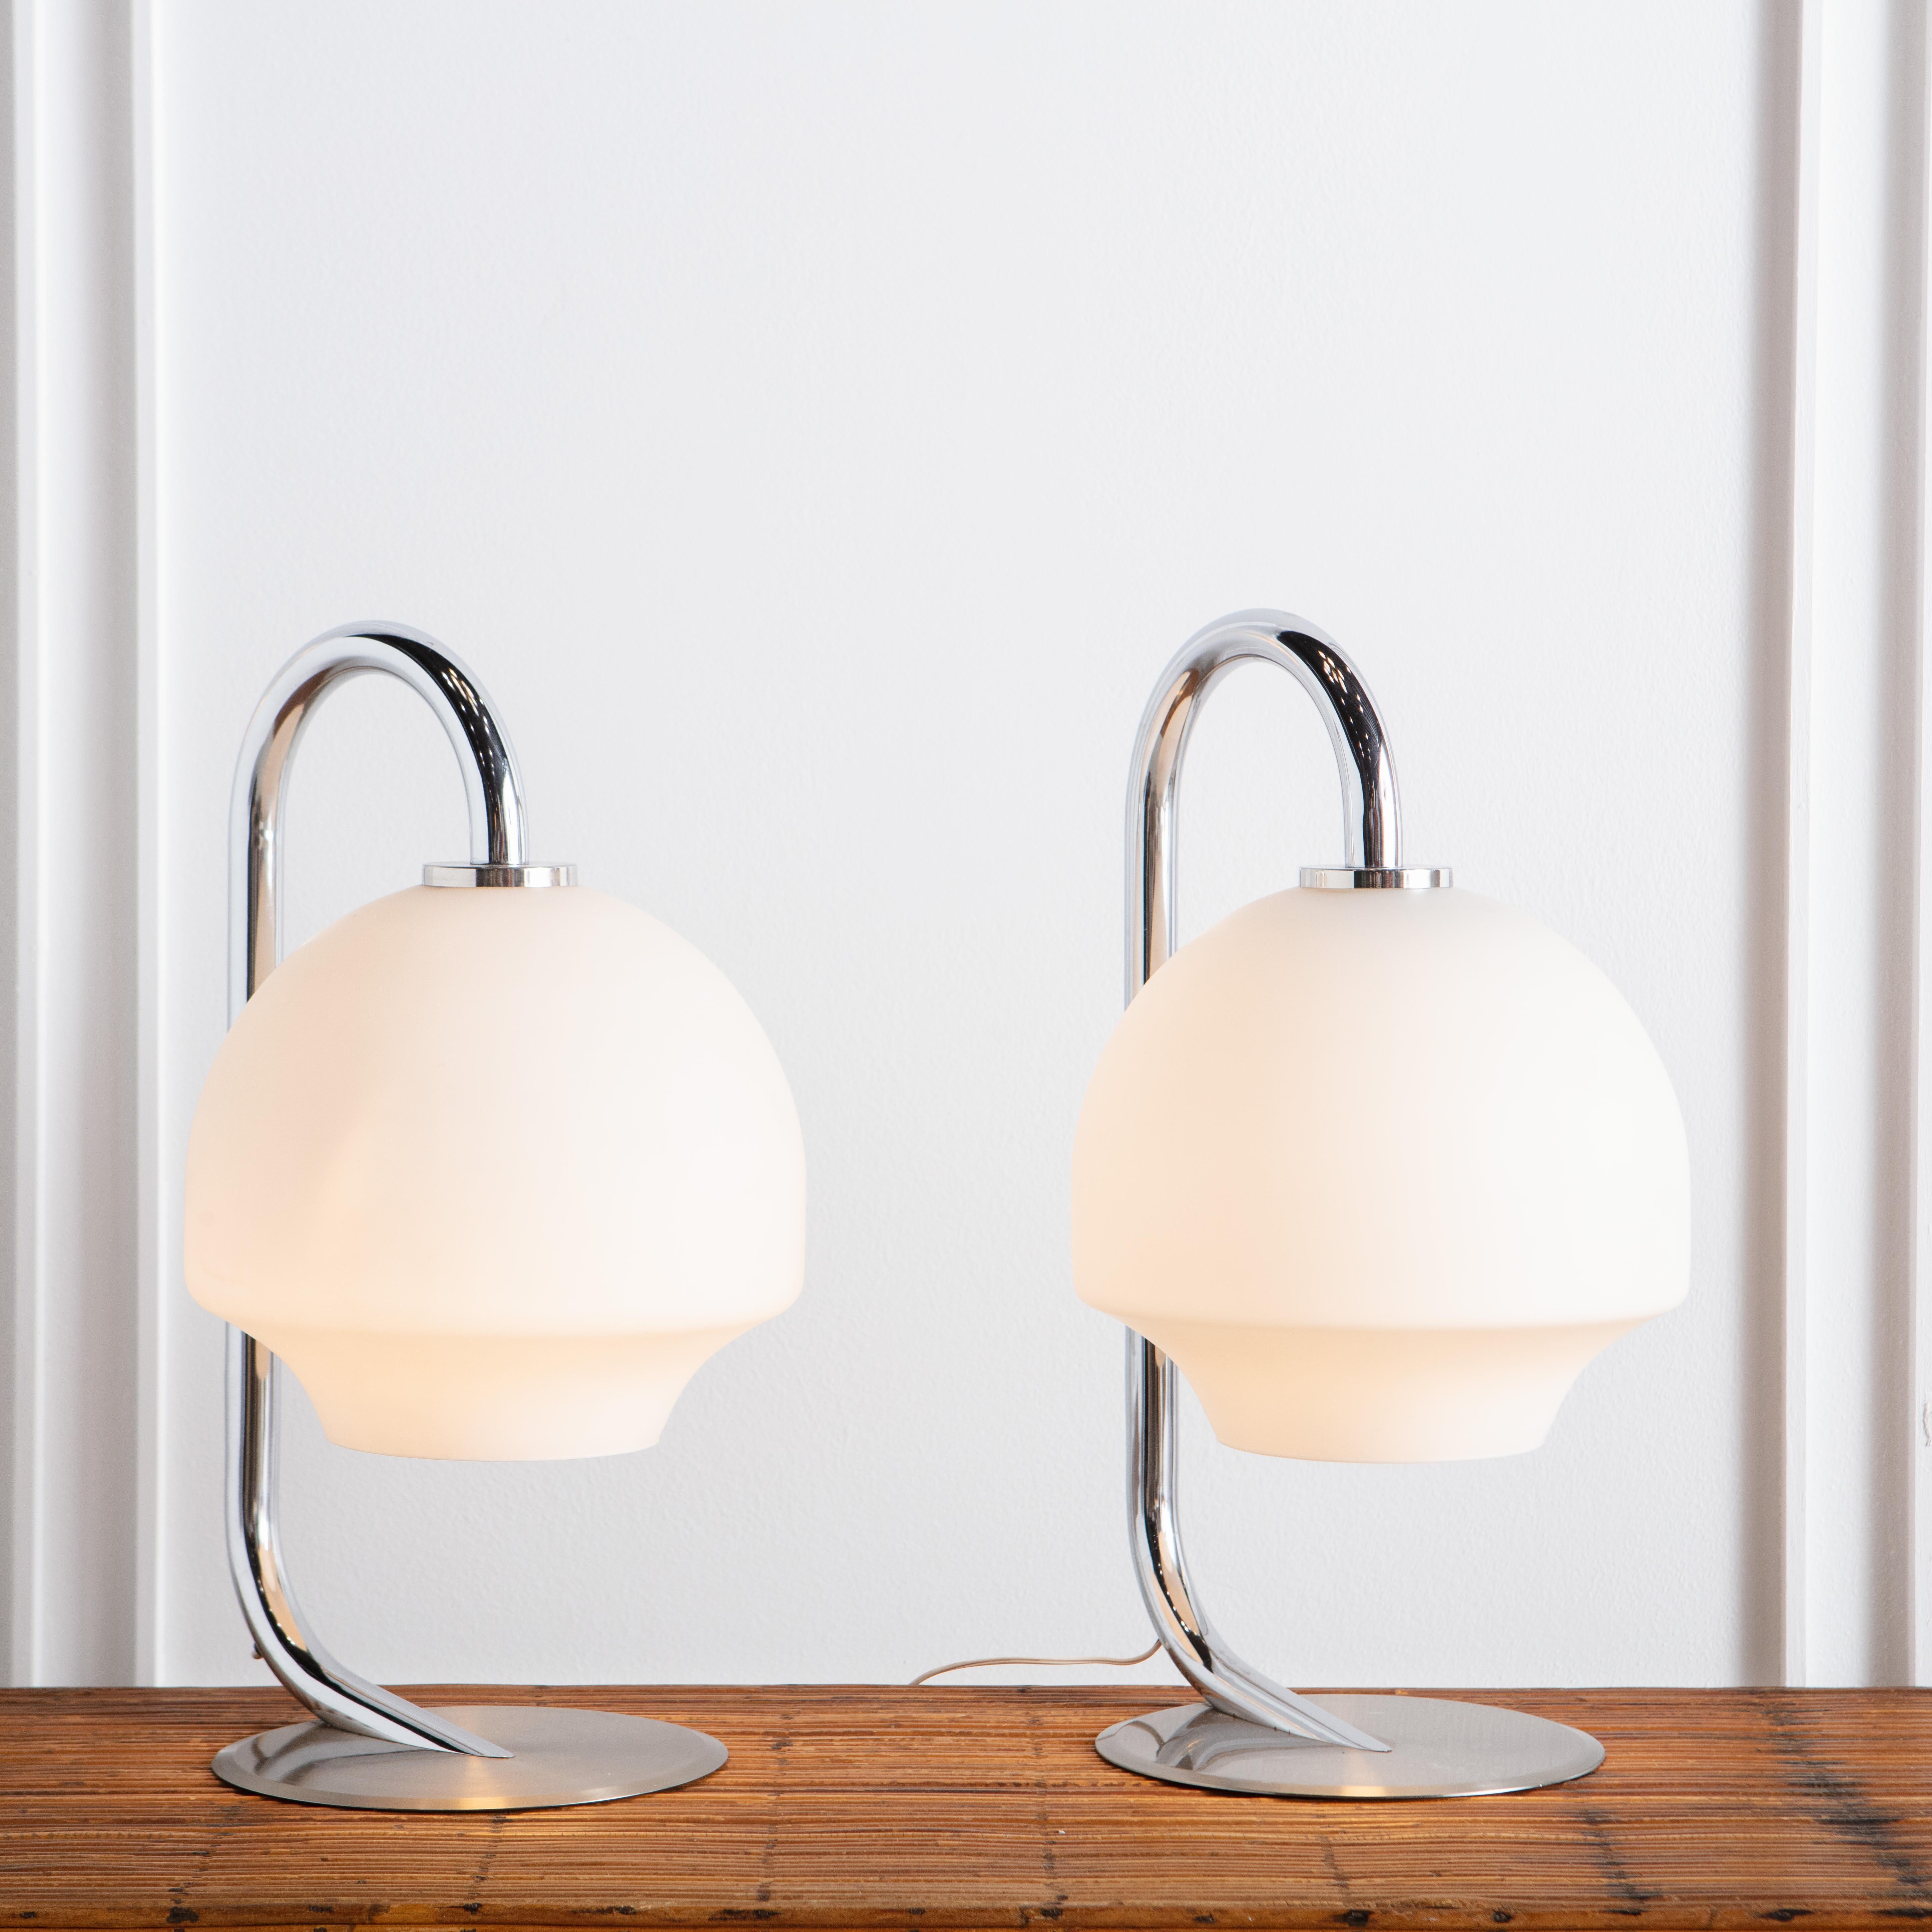 A pair of mid-20th entury table lamps from Spanish lighting manufacturer Fase. Featuring a brushed steel base and frosted glass shades that effuse a warm, ambient light. 

Fase was established in Madrid in 1964 by industrial designer Pedro Martín.